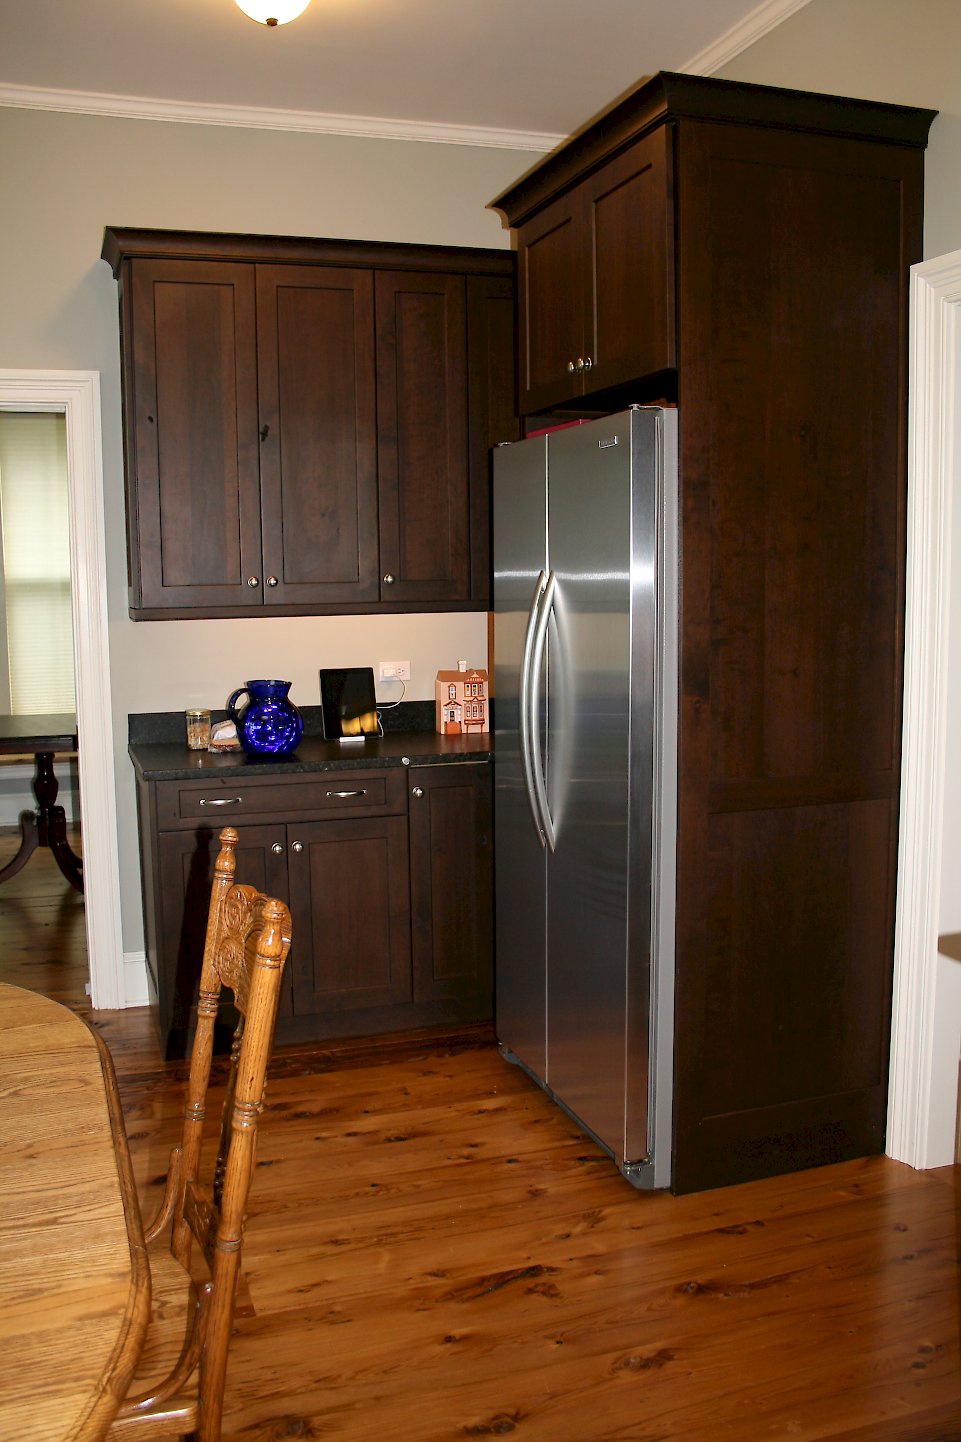 Side view of the refrigerator corner.